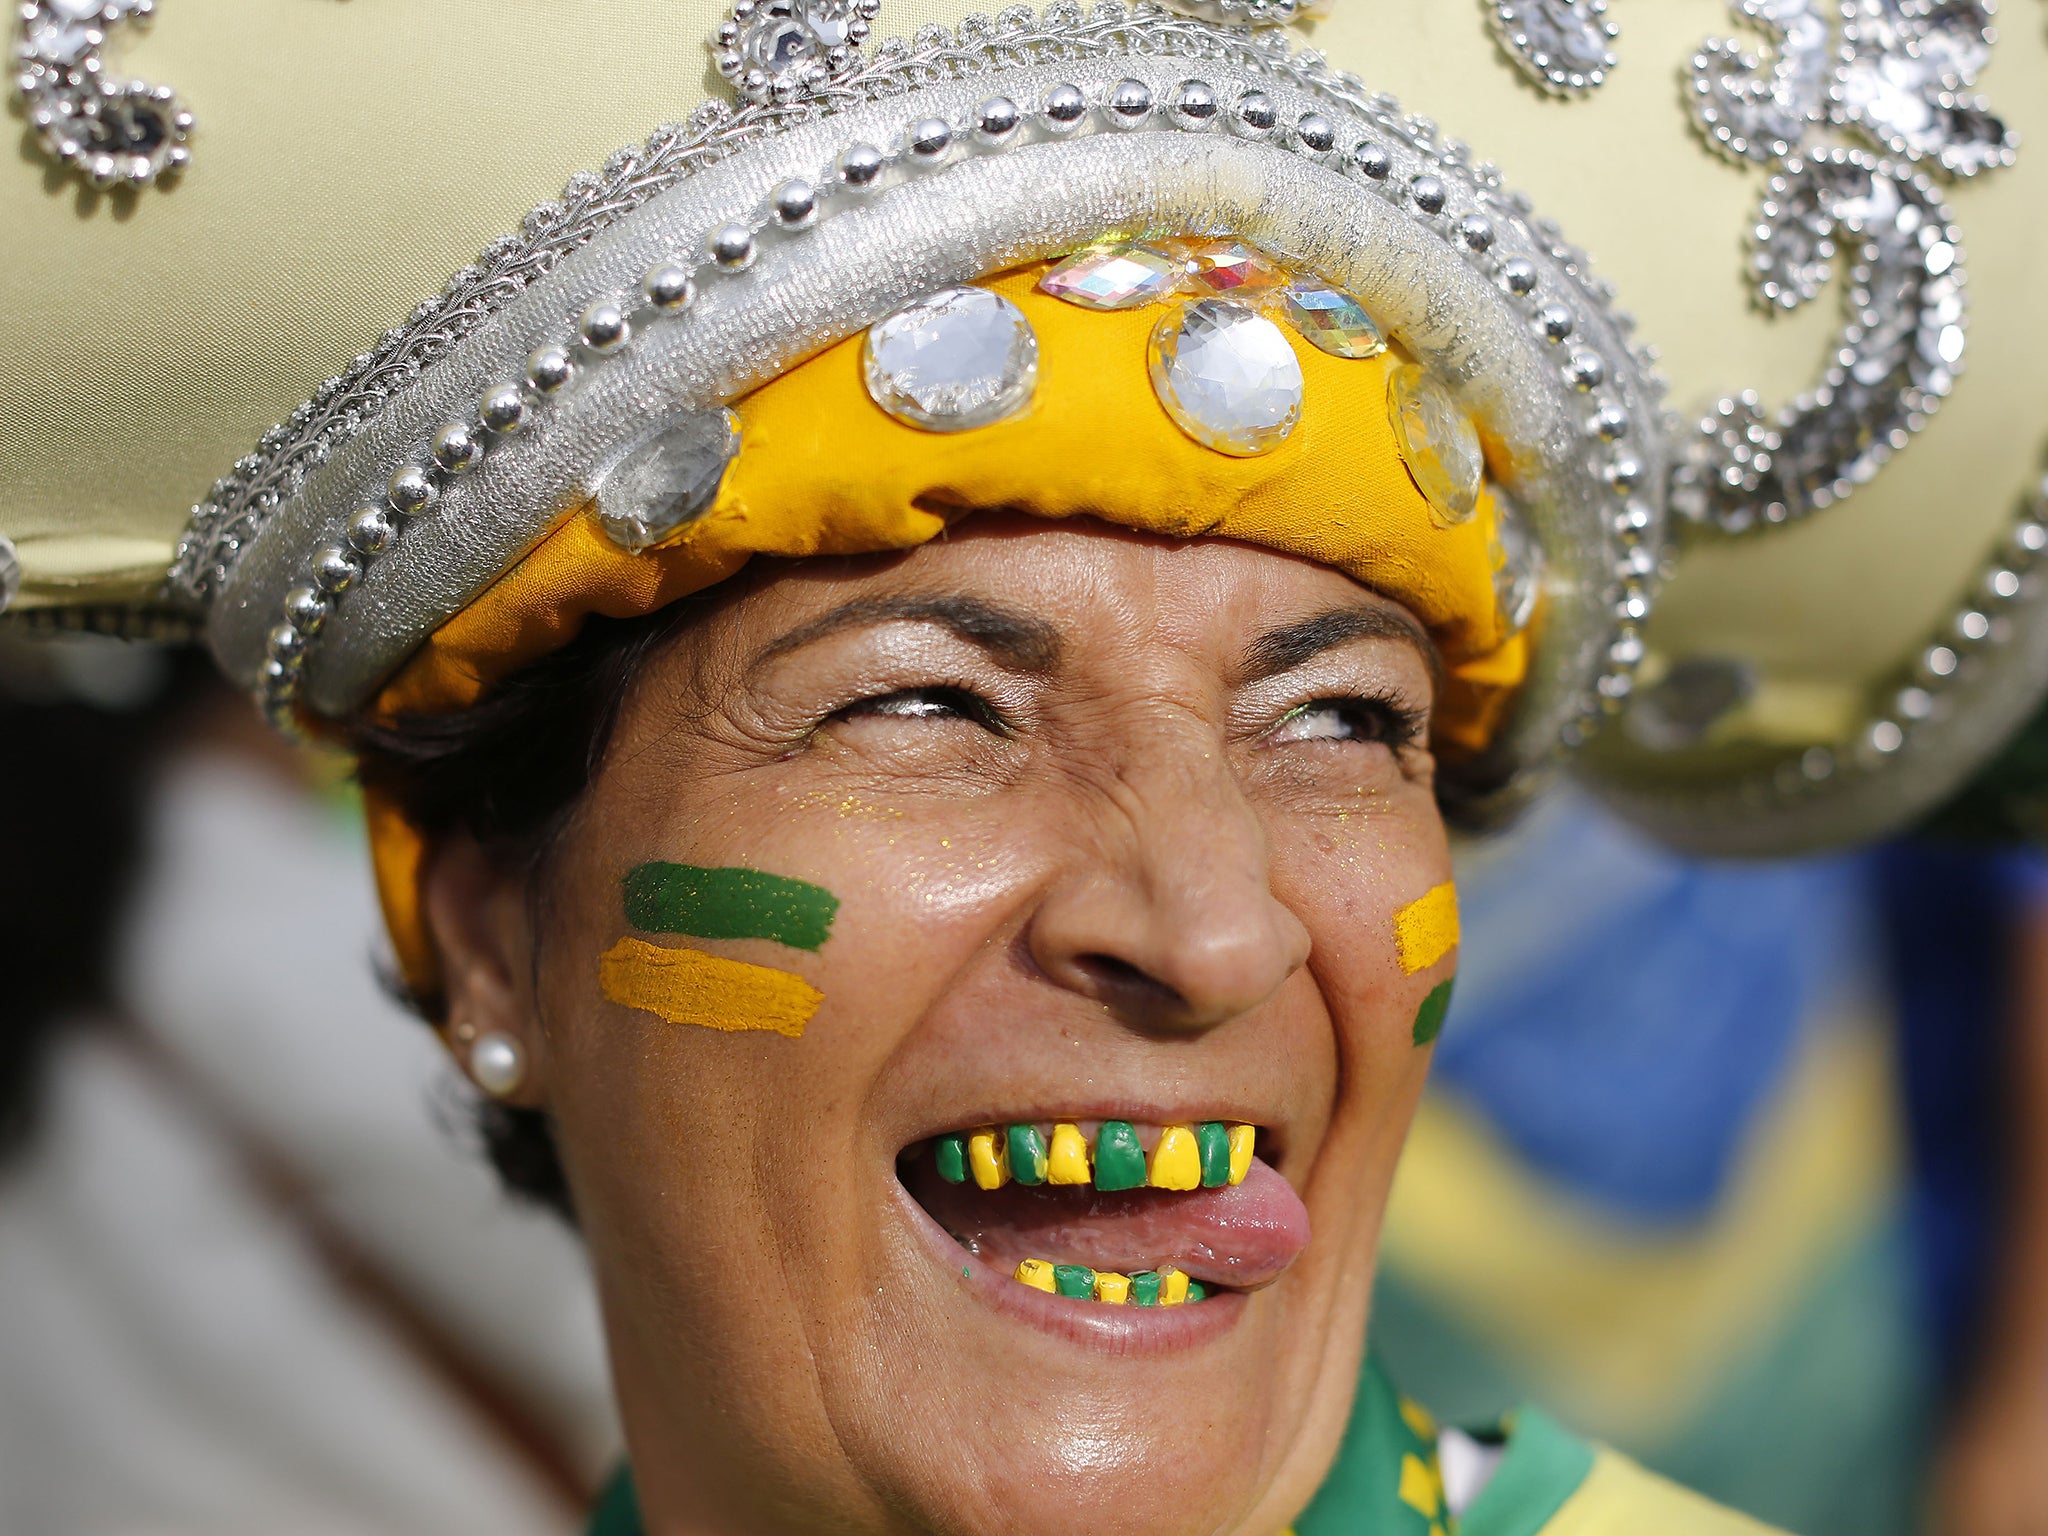 A Brazil soccer fan with her teeth decorated in the colors of her soccer team poses for a photo before watching the World Cup semifinal match between Brazil and Germany on a live telecast inside the FIFA Fan Fest area on Copacabana beach in Rio de Janeiro